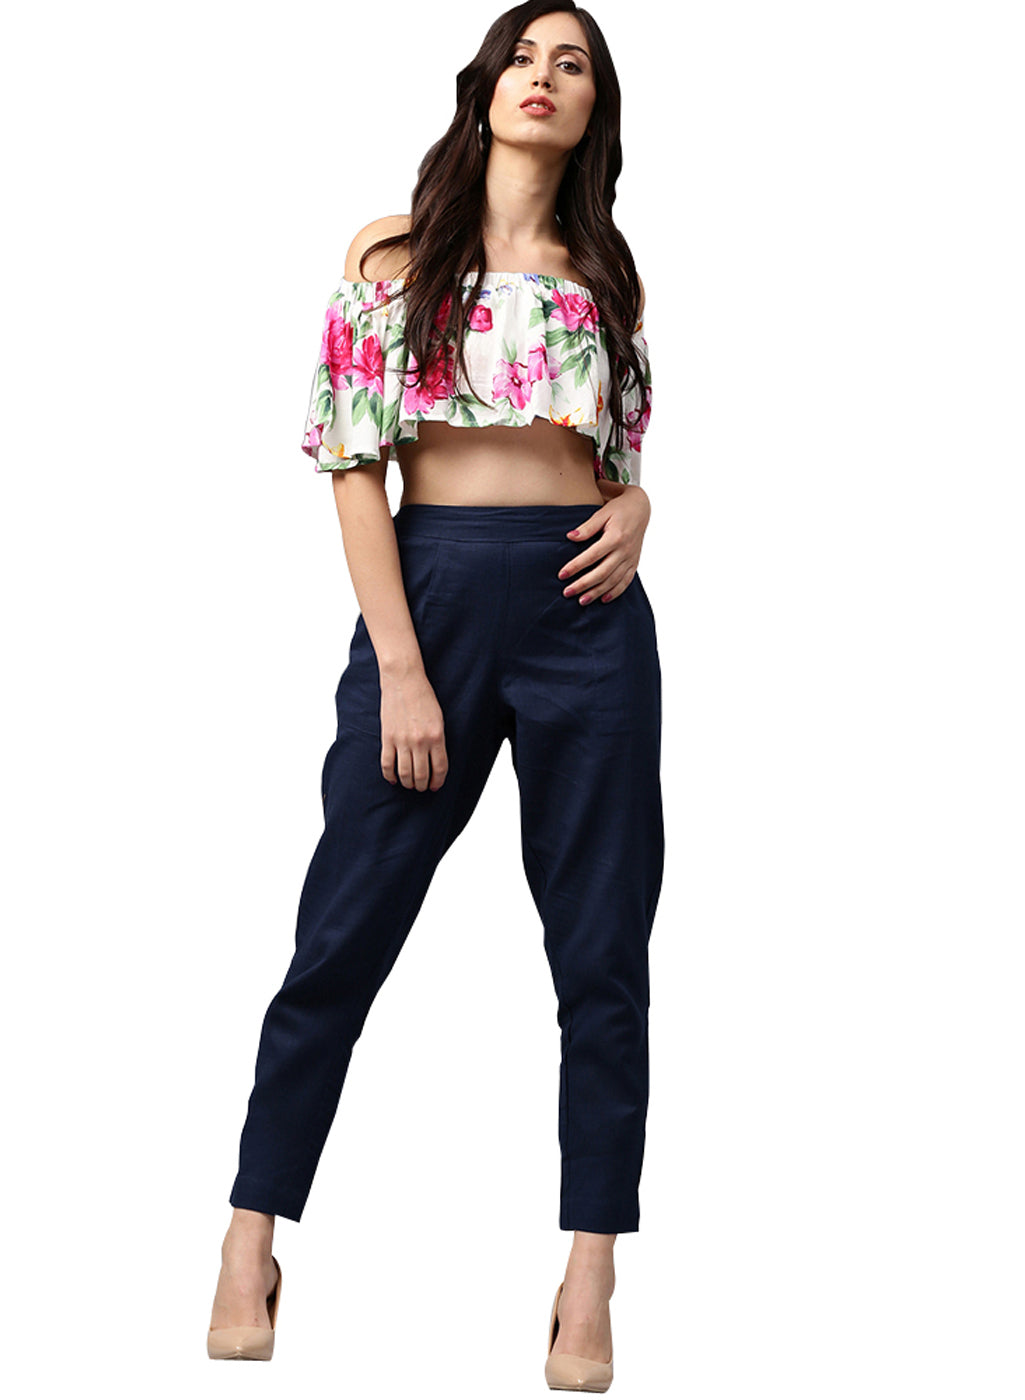 Get Ankle Pants for Women